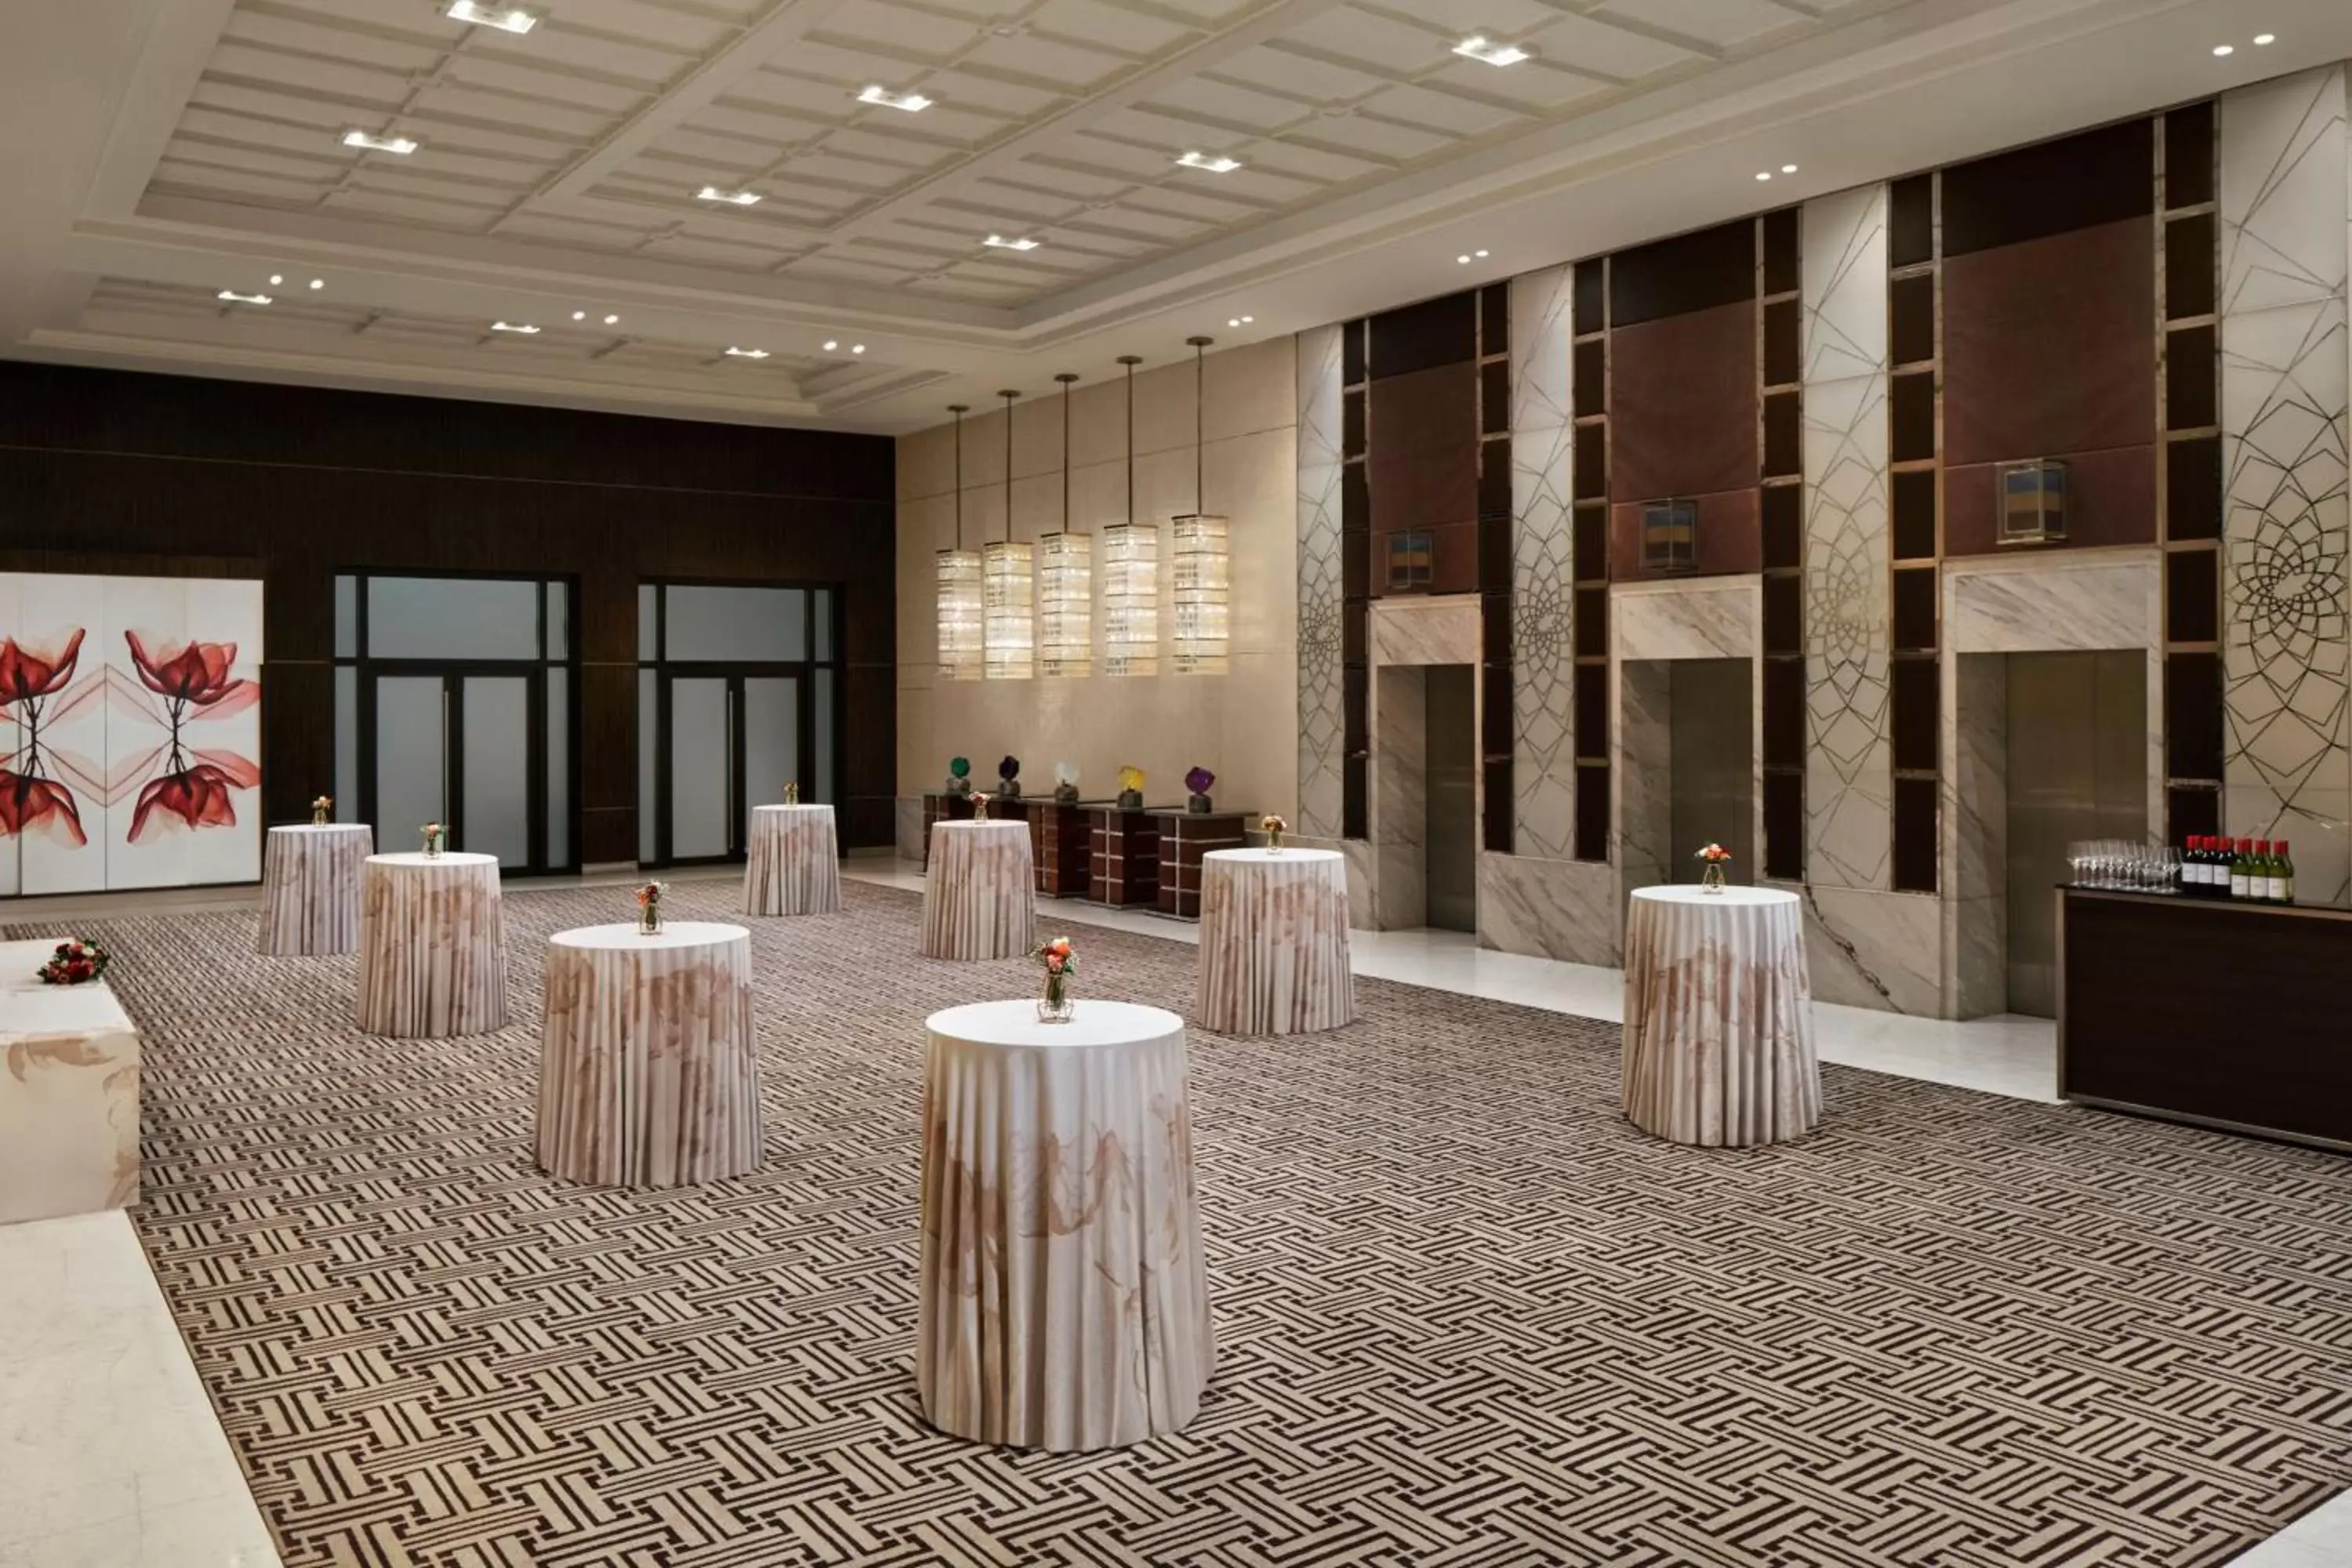 Banquet/Function facilities, Banquet Facilities in The Westin Singapore